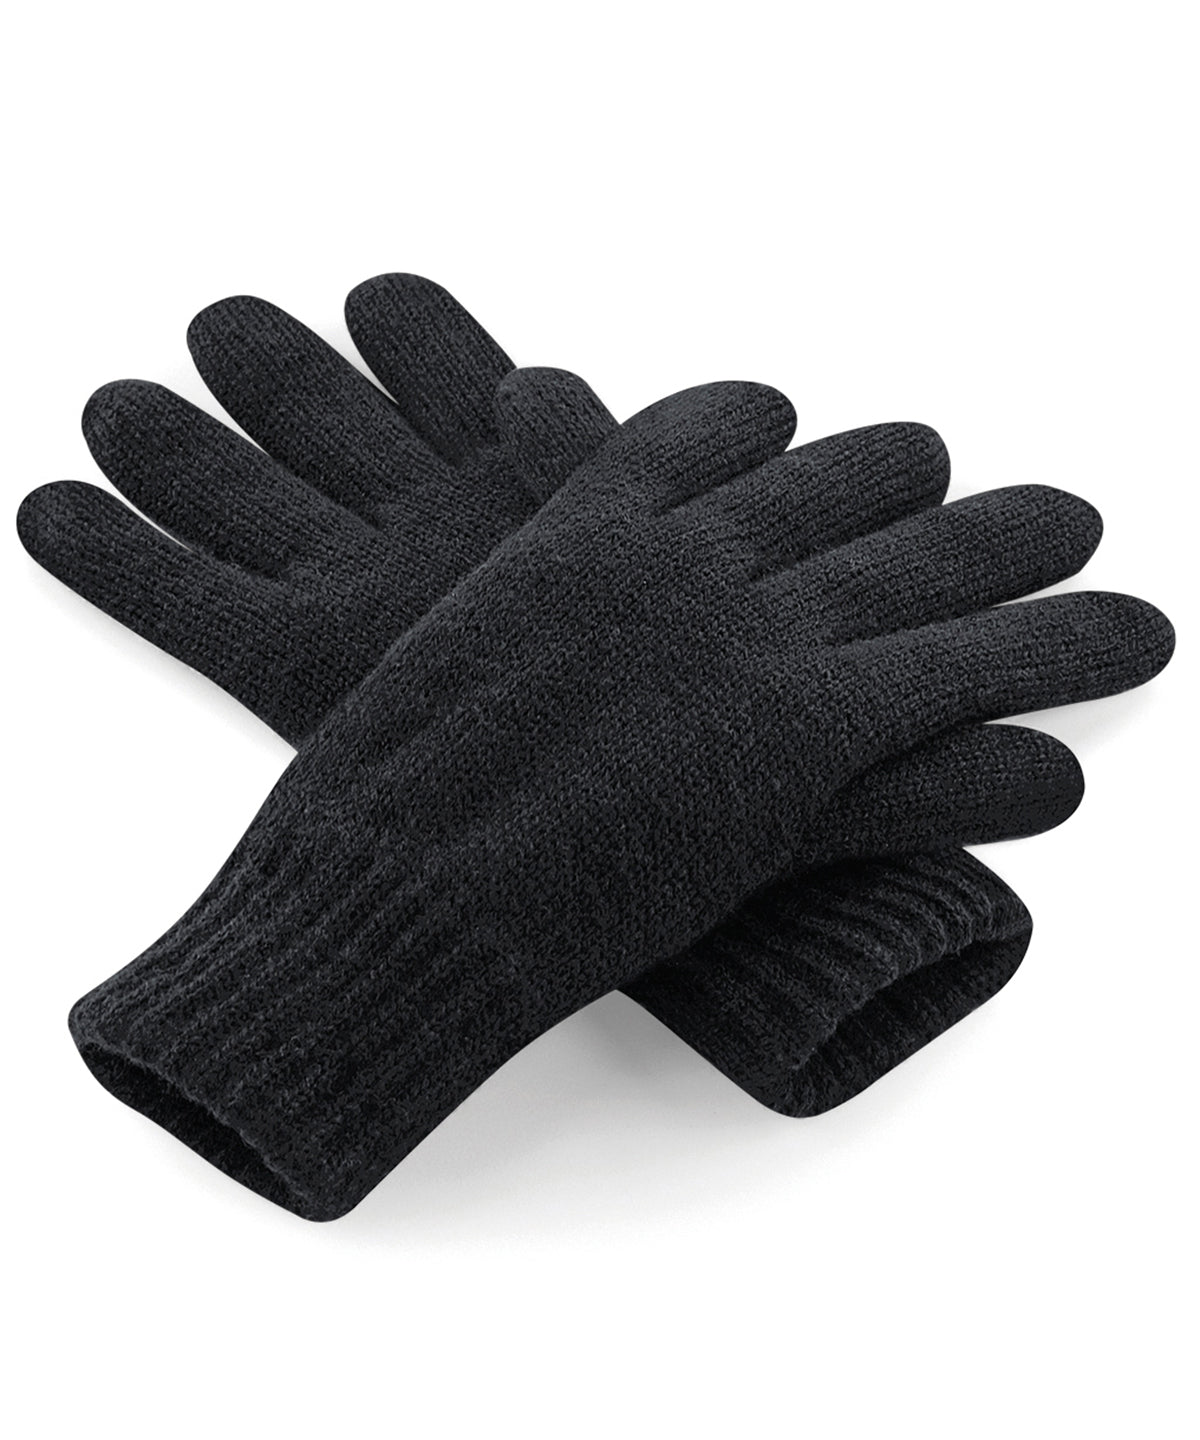 Personalised Gloves - Black Beechfield Classic Thinsulate™ gloves